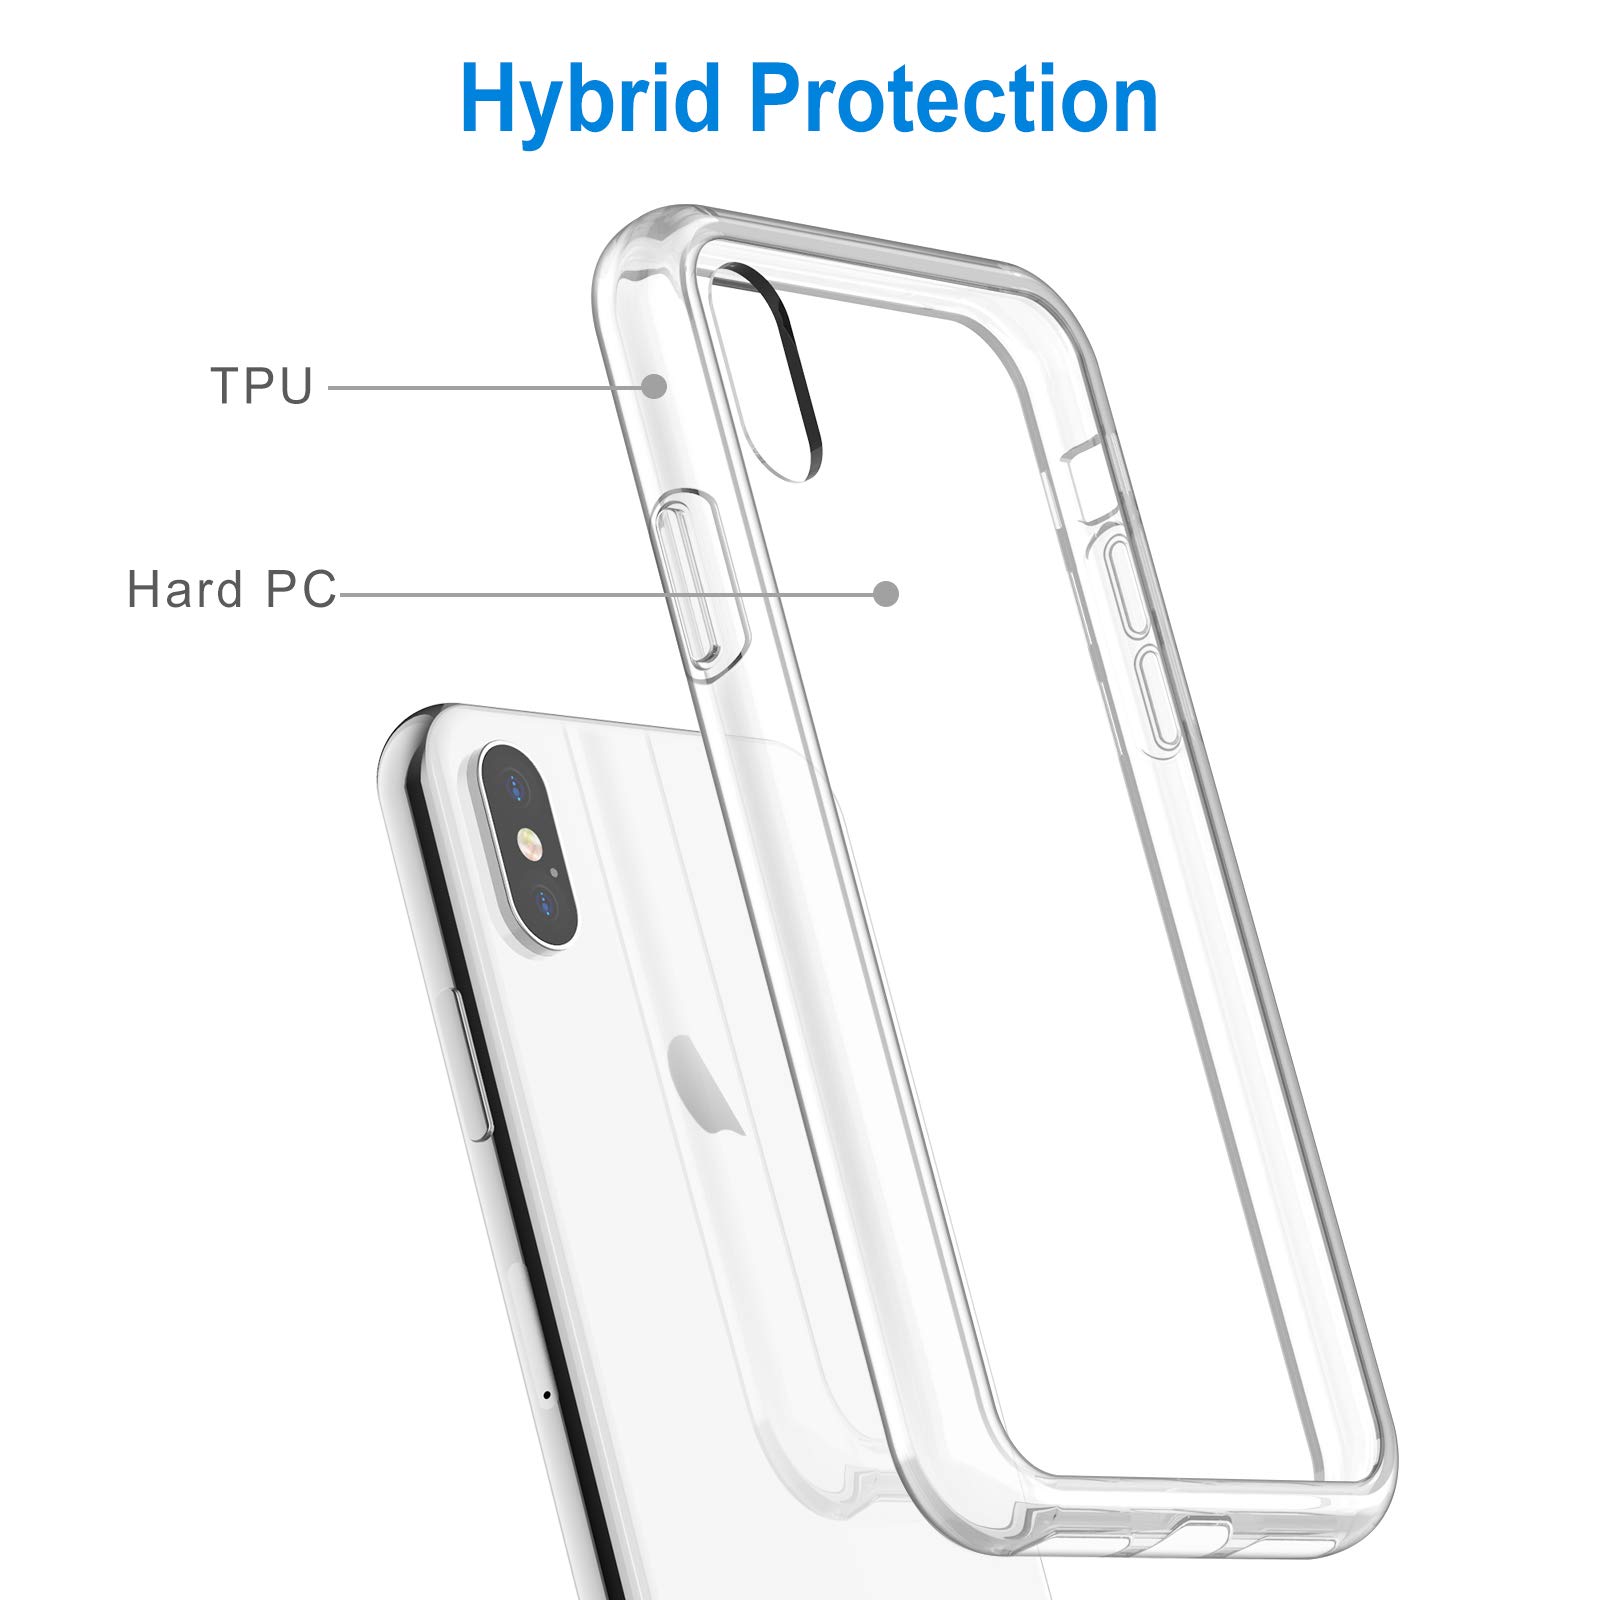 JETech iPhone Xs and iPhone X Bumper Cover and Tempered Glass Screen Protector Bundle